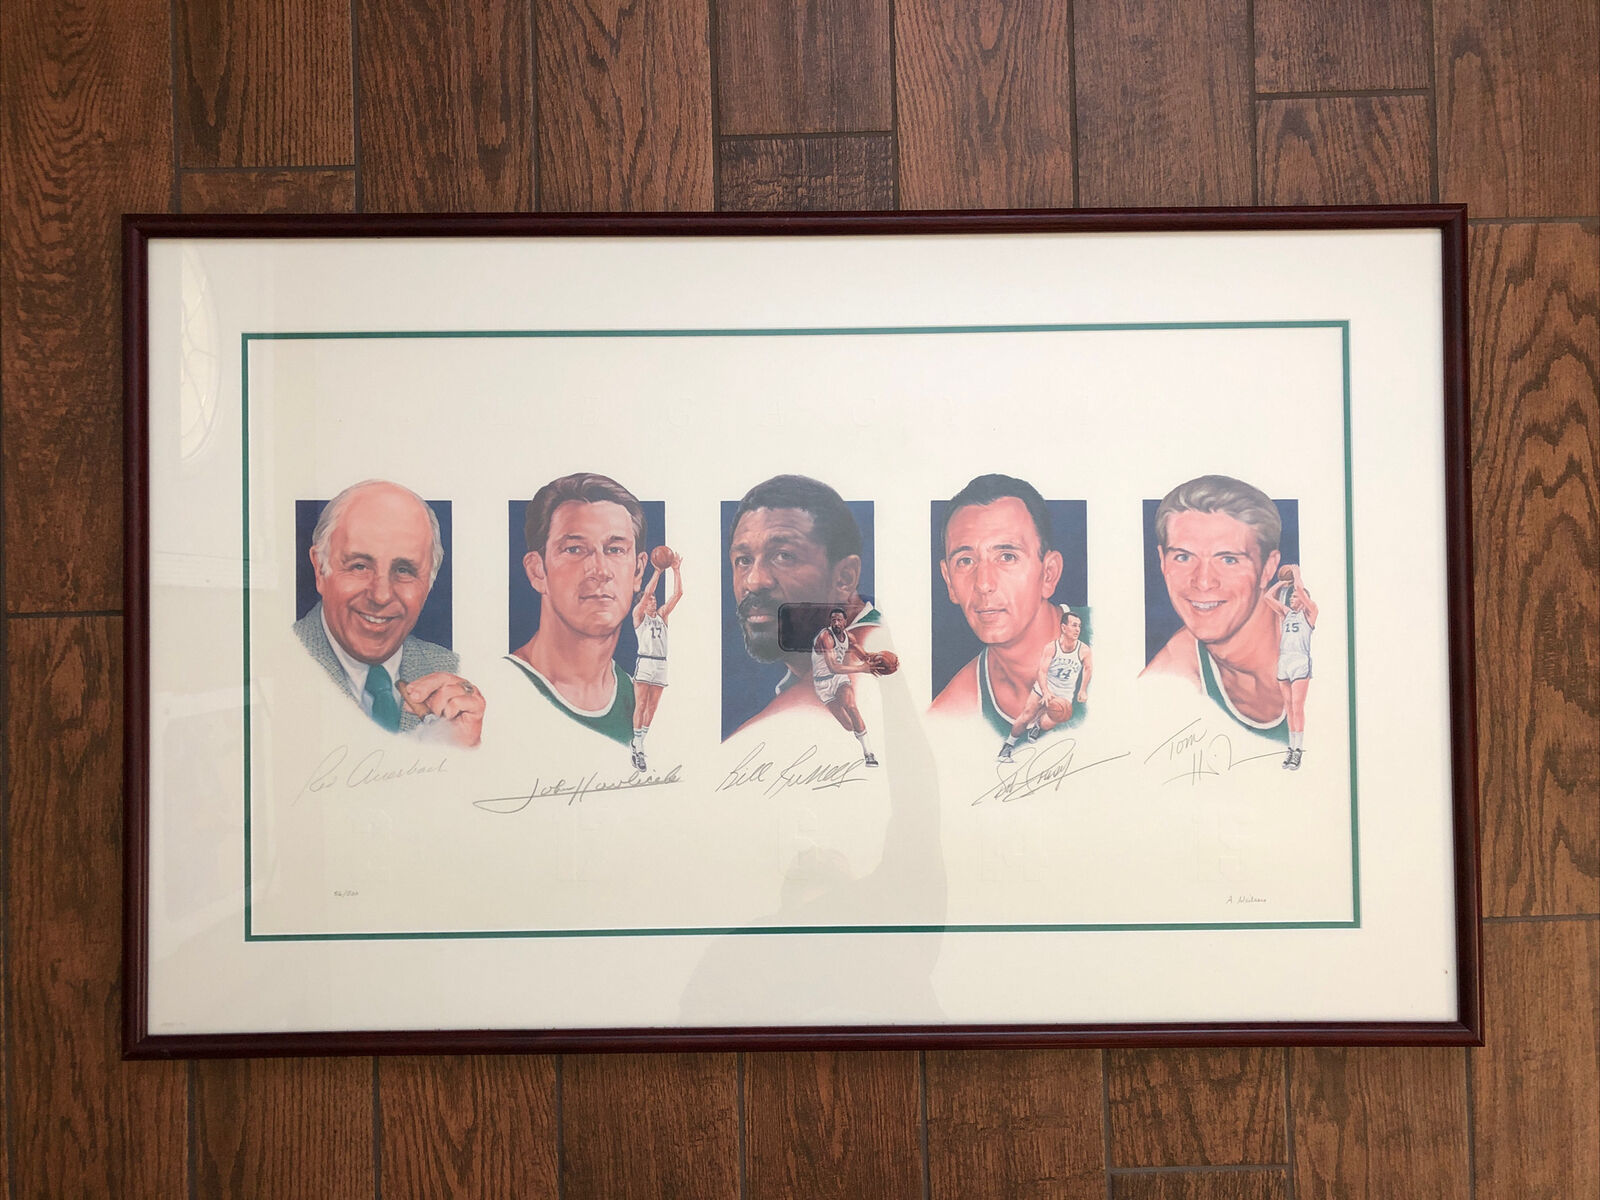 Boston Celtics Legends Lithograph 56/500 Signed Russell Cousy Auerbach Havlicek